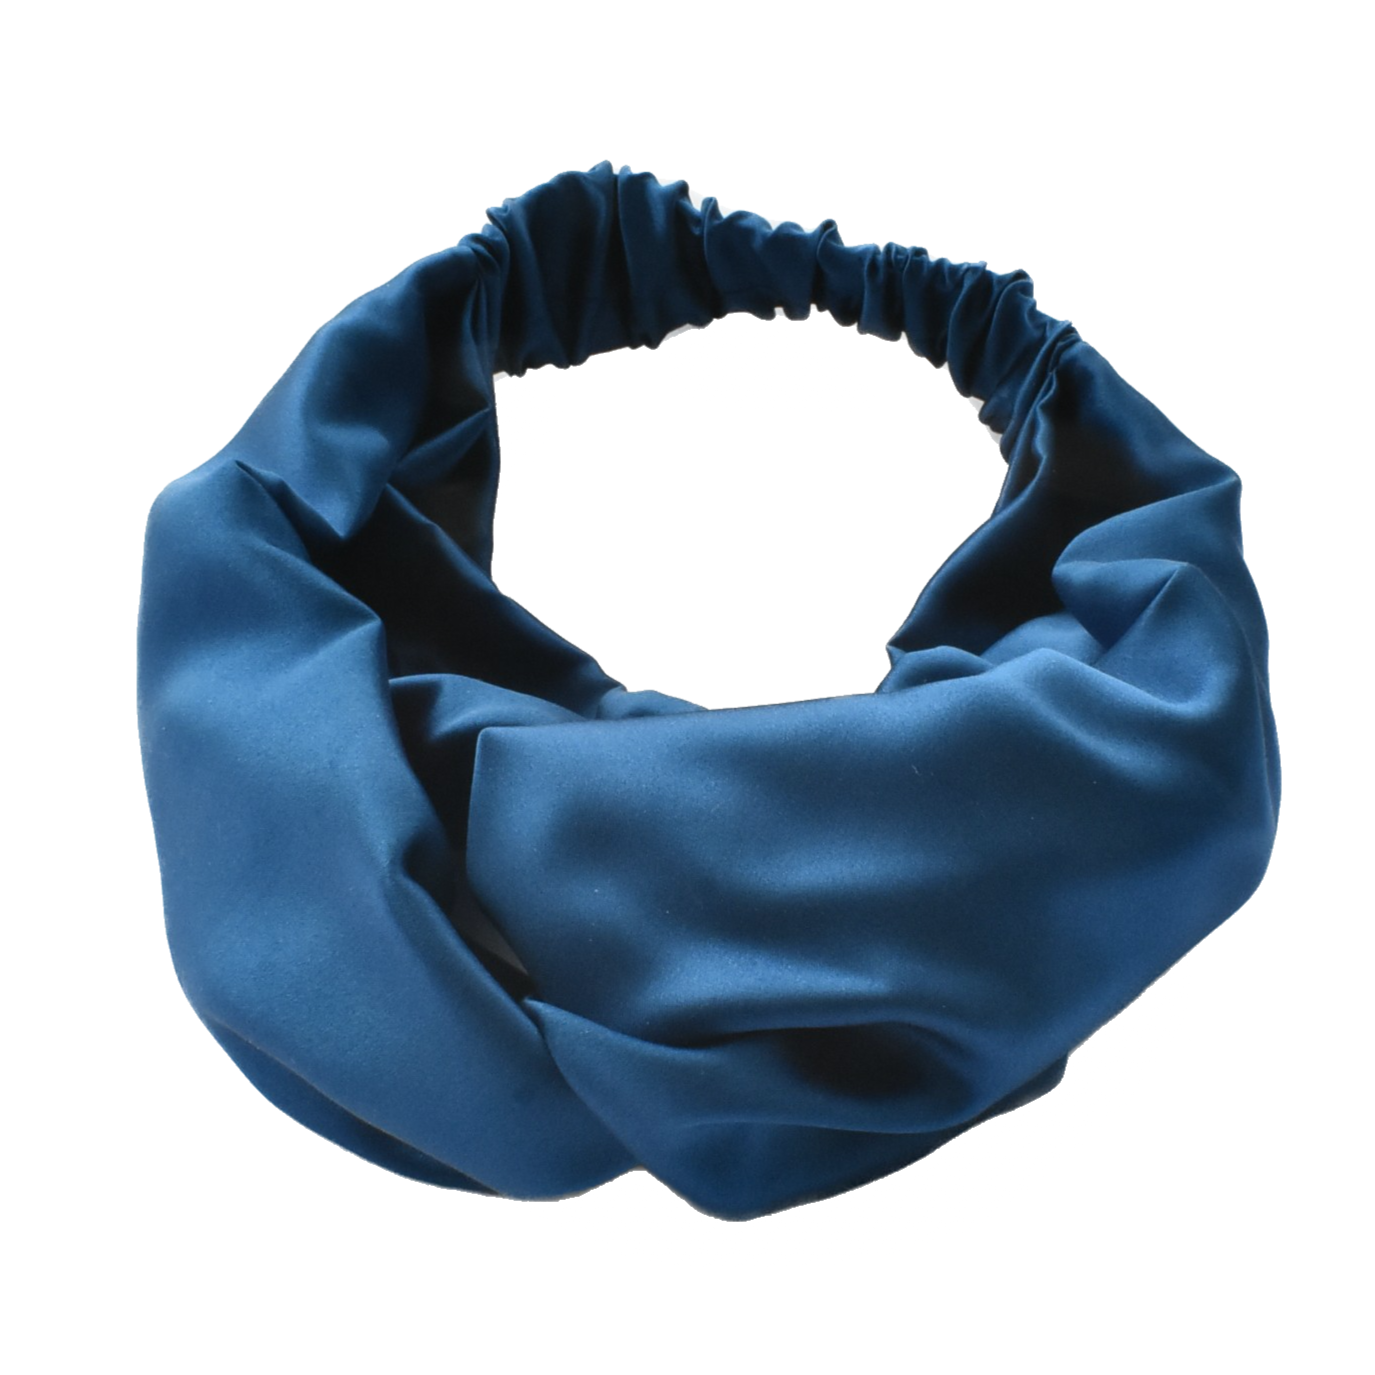 Silk Twisted Turban hairband and neck scarf in Peacock Blue Mulberry Silk - 100% pure silk satin